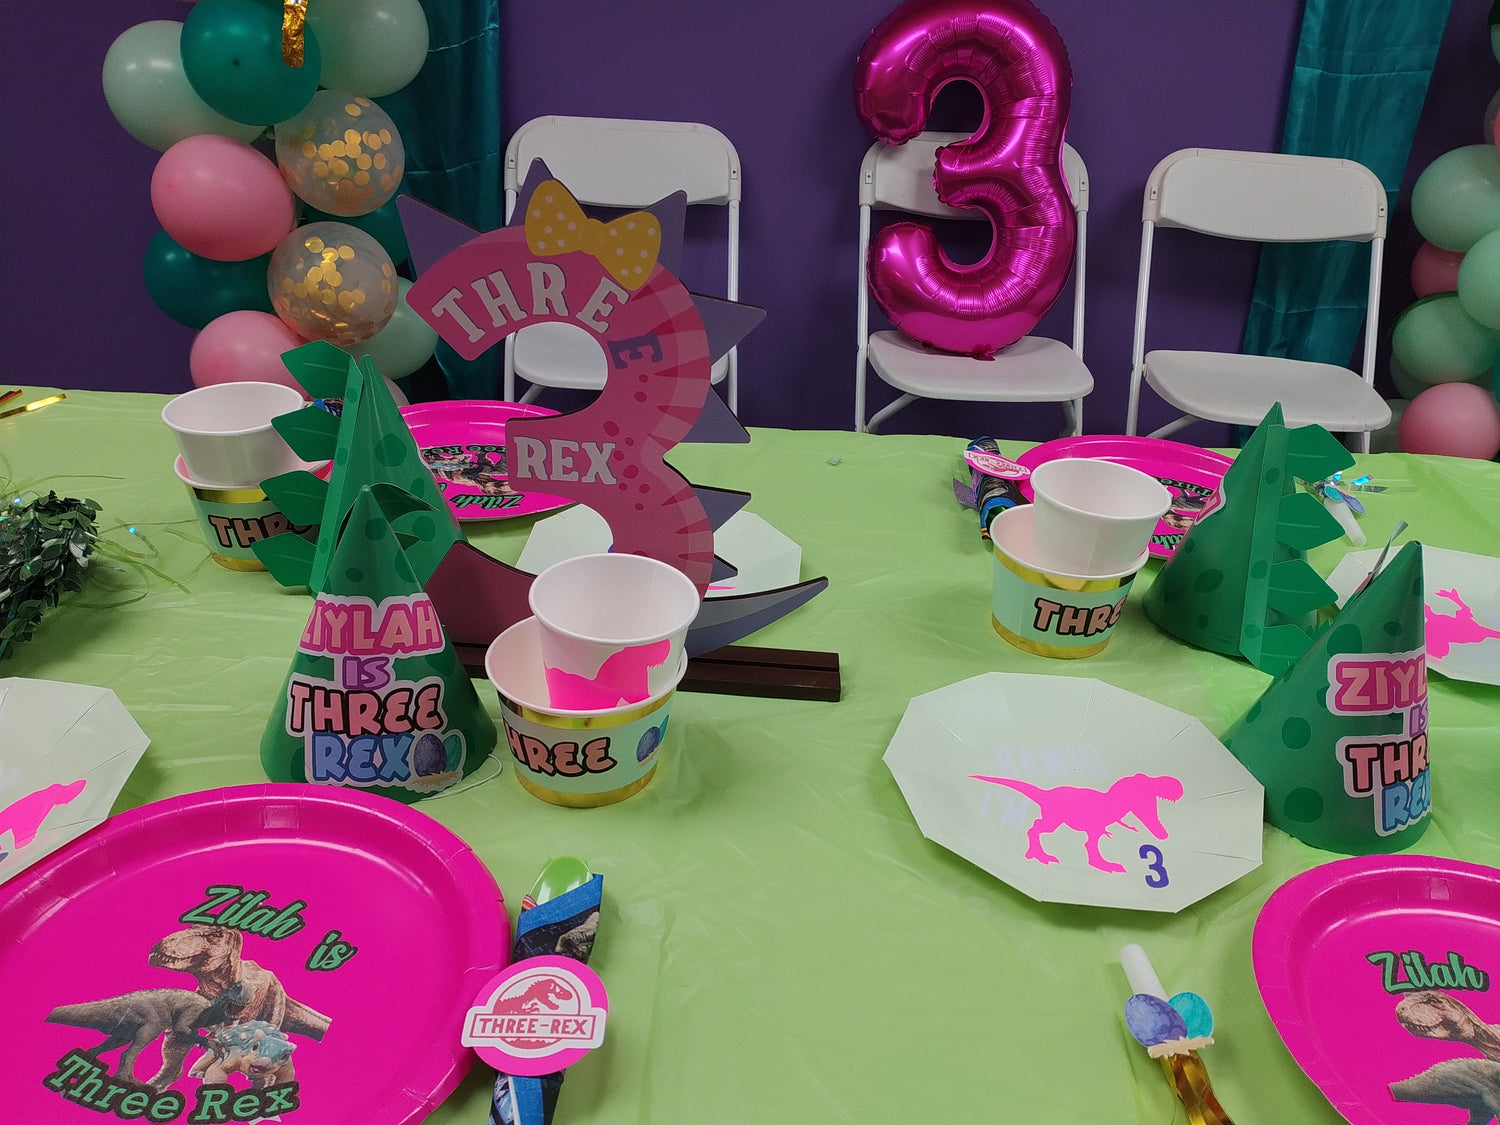 Three Rex Birthday Party Package